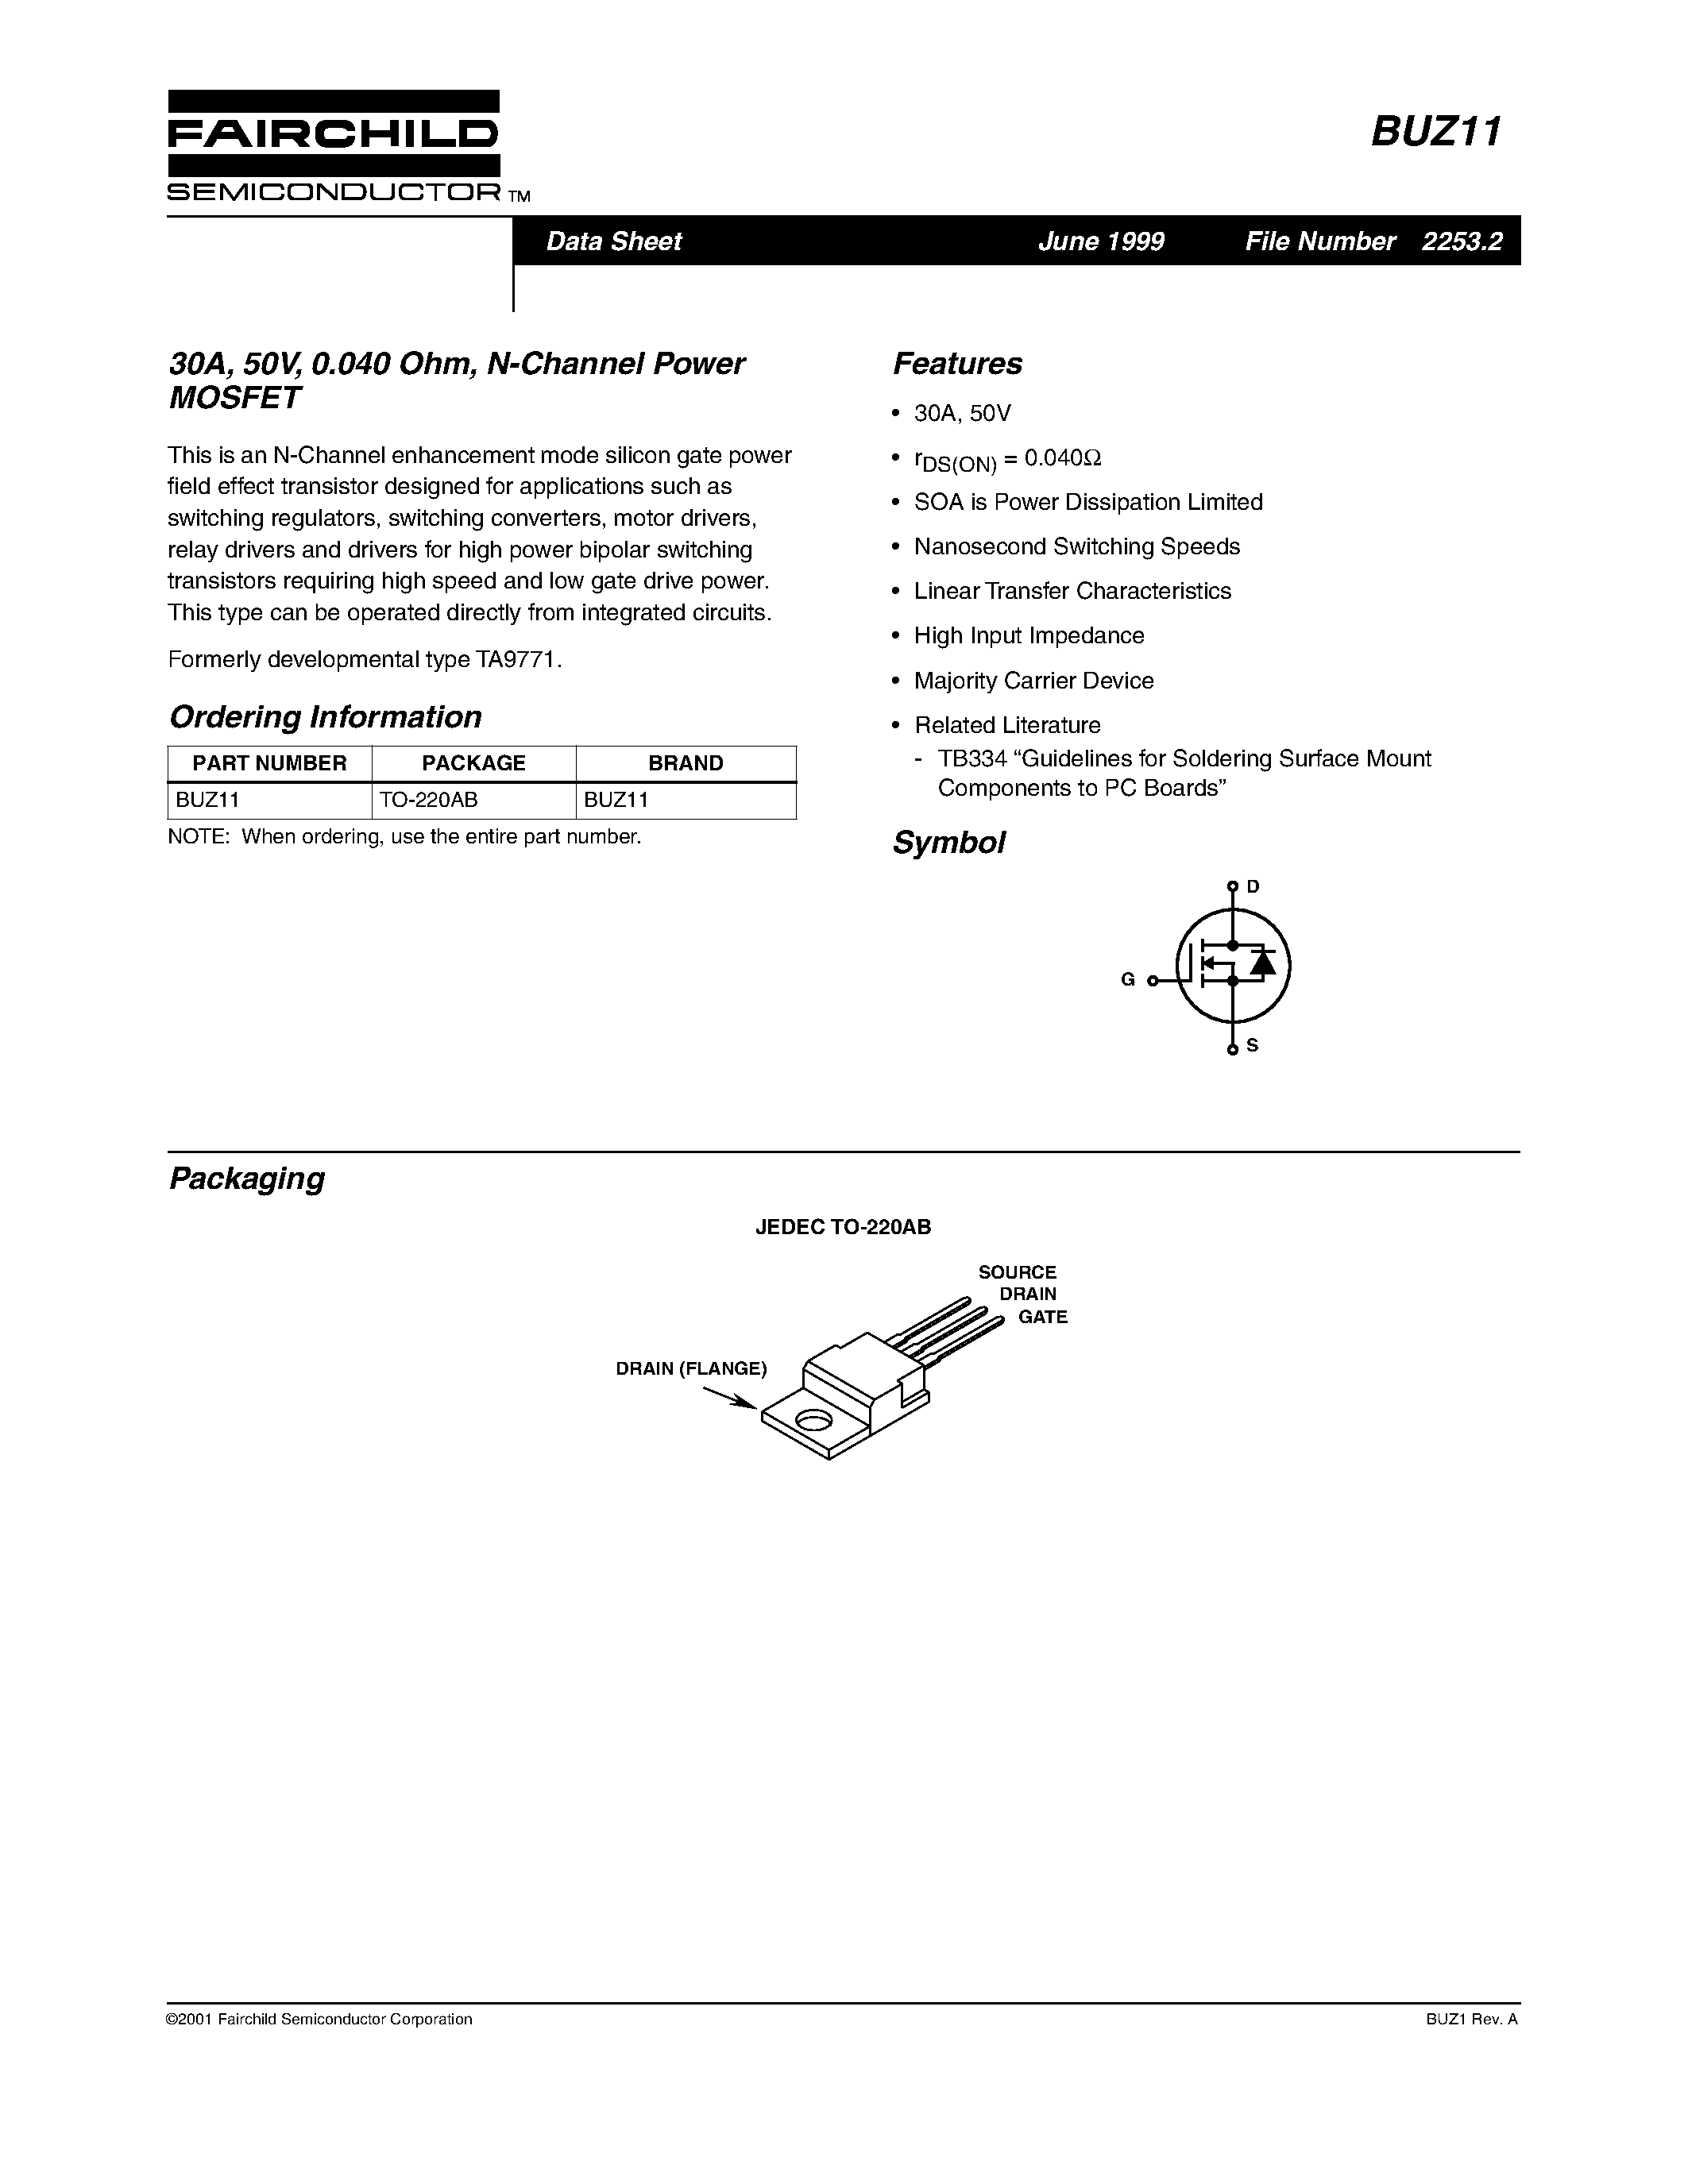 Datasheet BUZ11 - 30A/ 50V/ 0.040 Ohm/ N-Channel Power MOSFET page 1